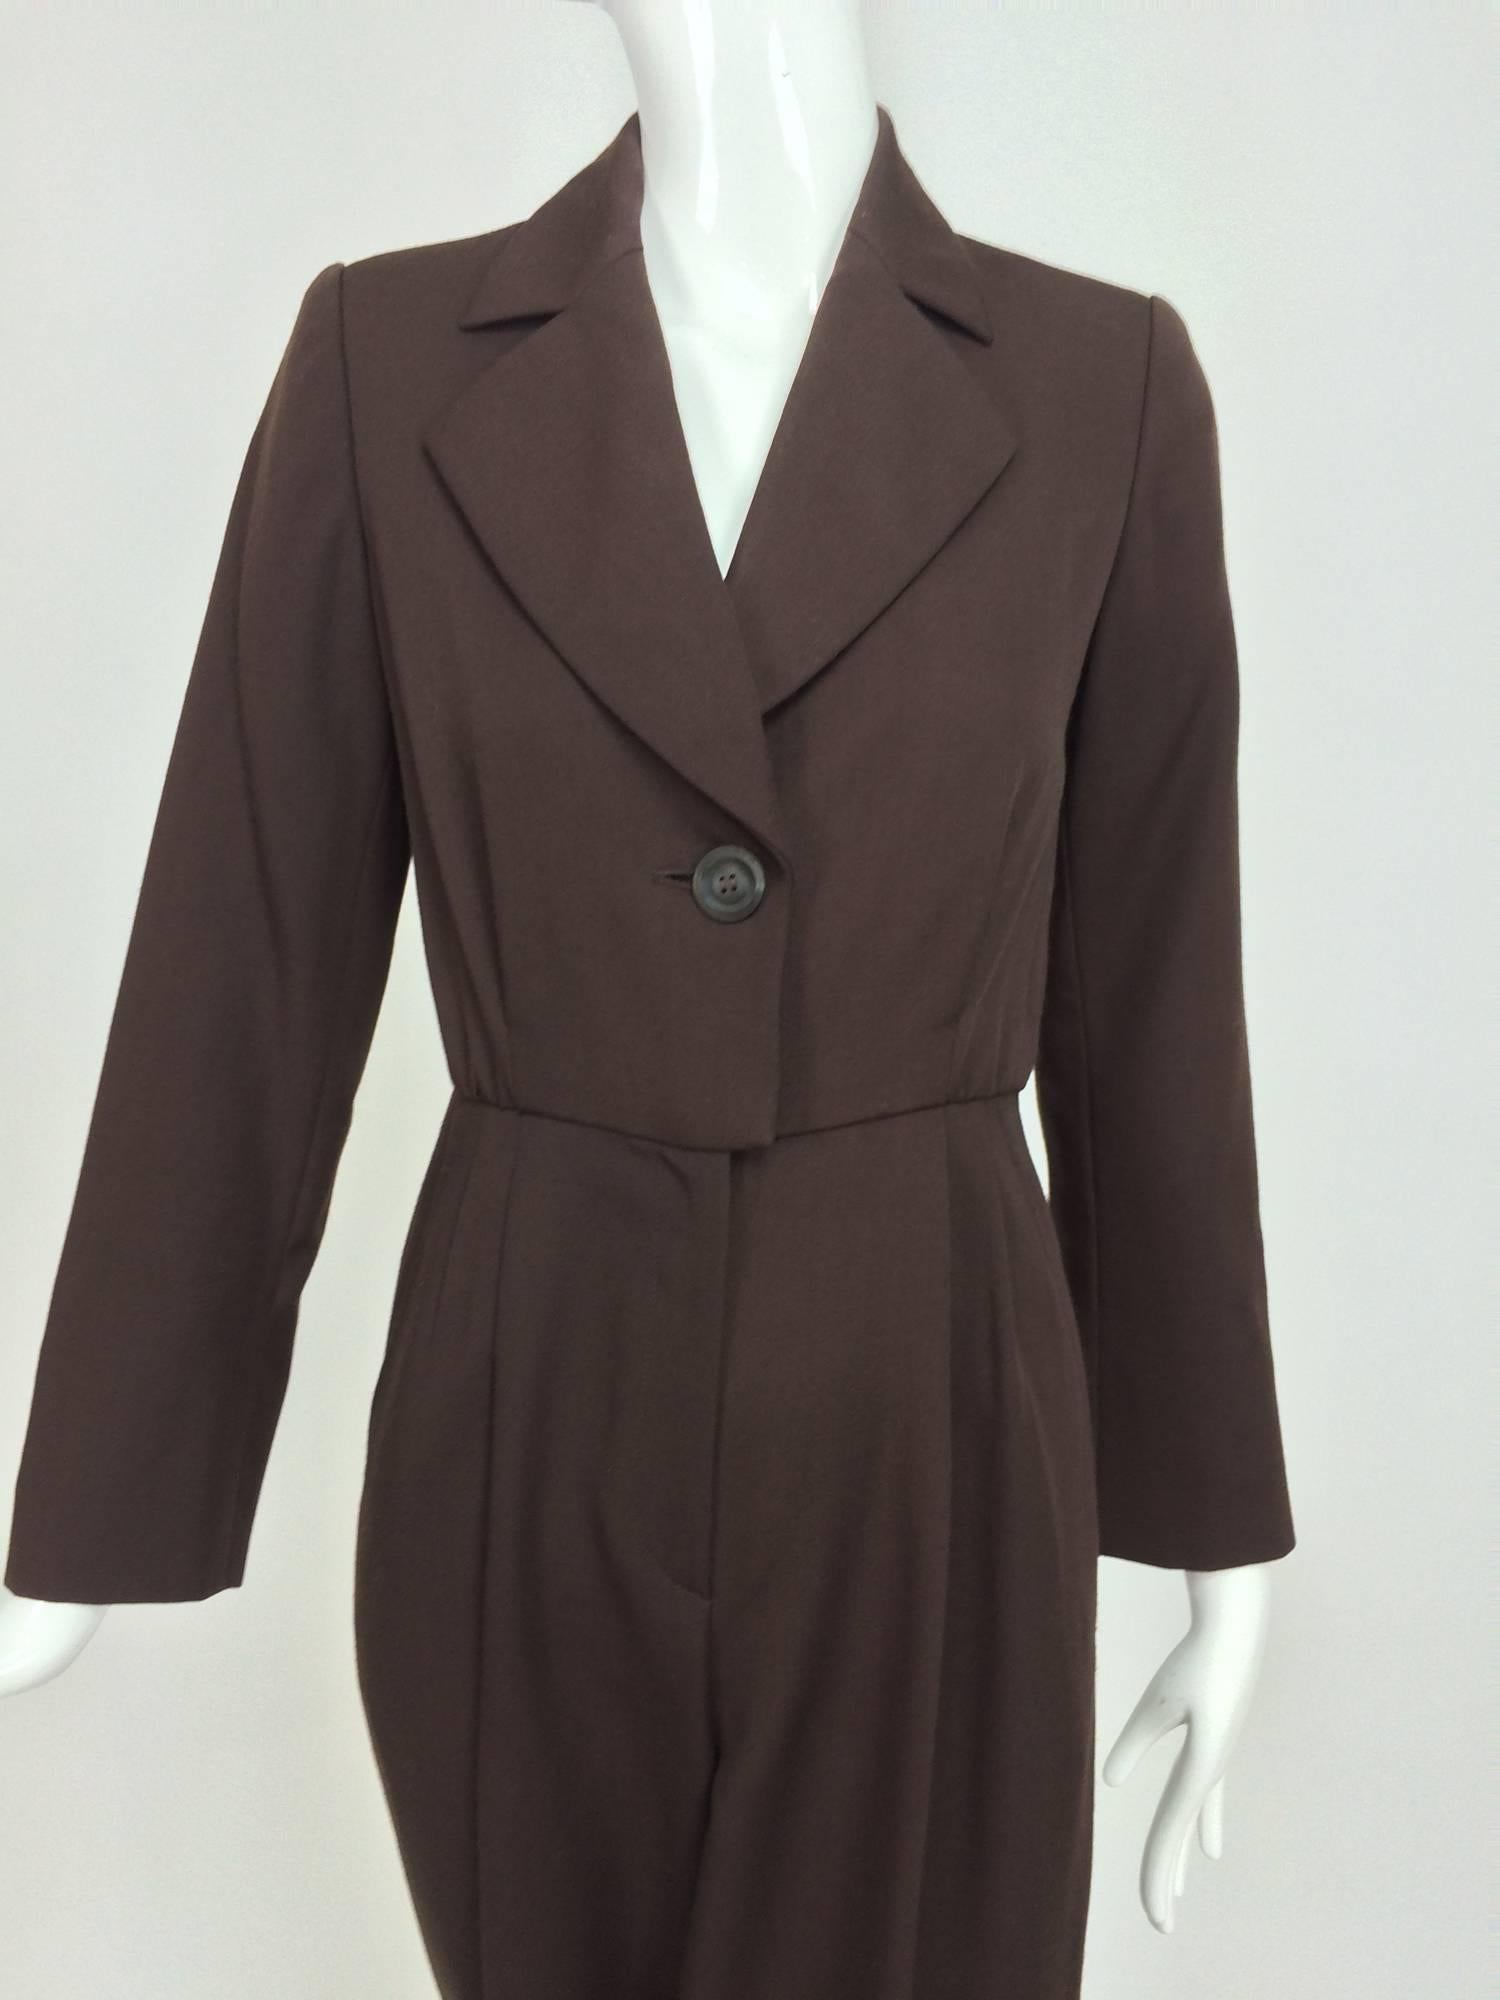 Vintage Yves Saint Laurent YSL brown wool tuxedo jumpsuit 1970s...One piece jumpsuit with the look of a tuxedo/le smoking...Step in, single button at the front with a deep V neckline and notched lapels...Long sleeves with single button cuffs...The